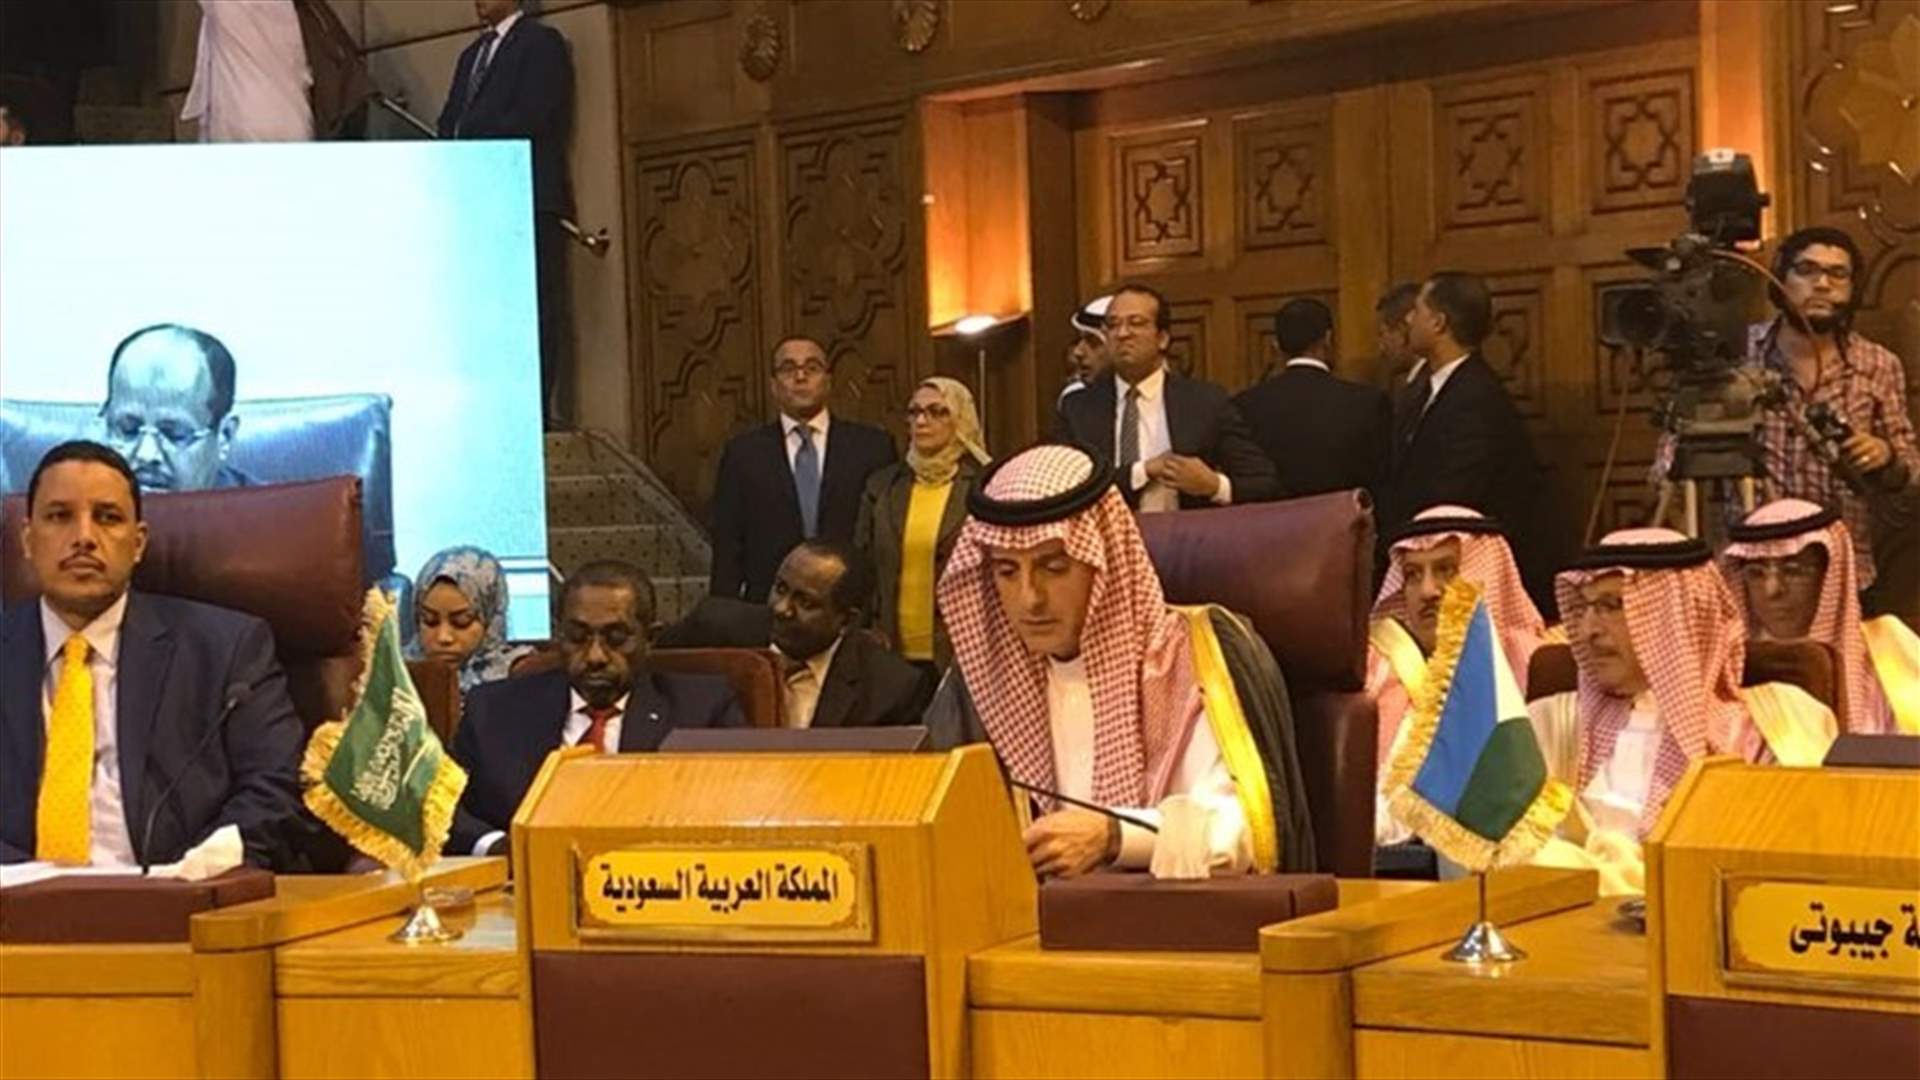 Al-Jubeir: Saudi Arabia will not stand idly by as Iran’s attacks continue